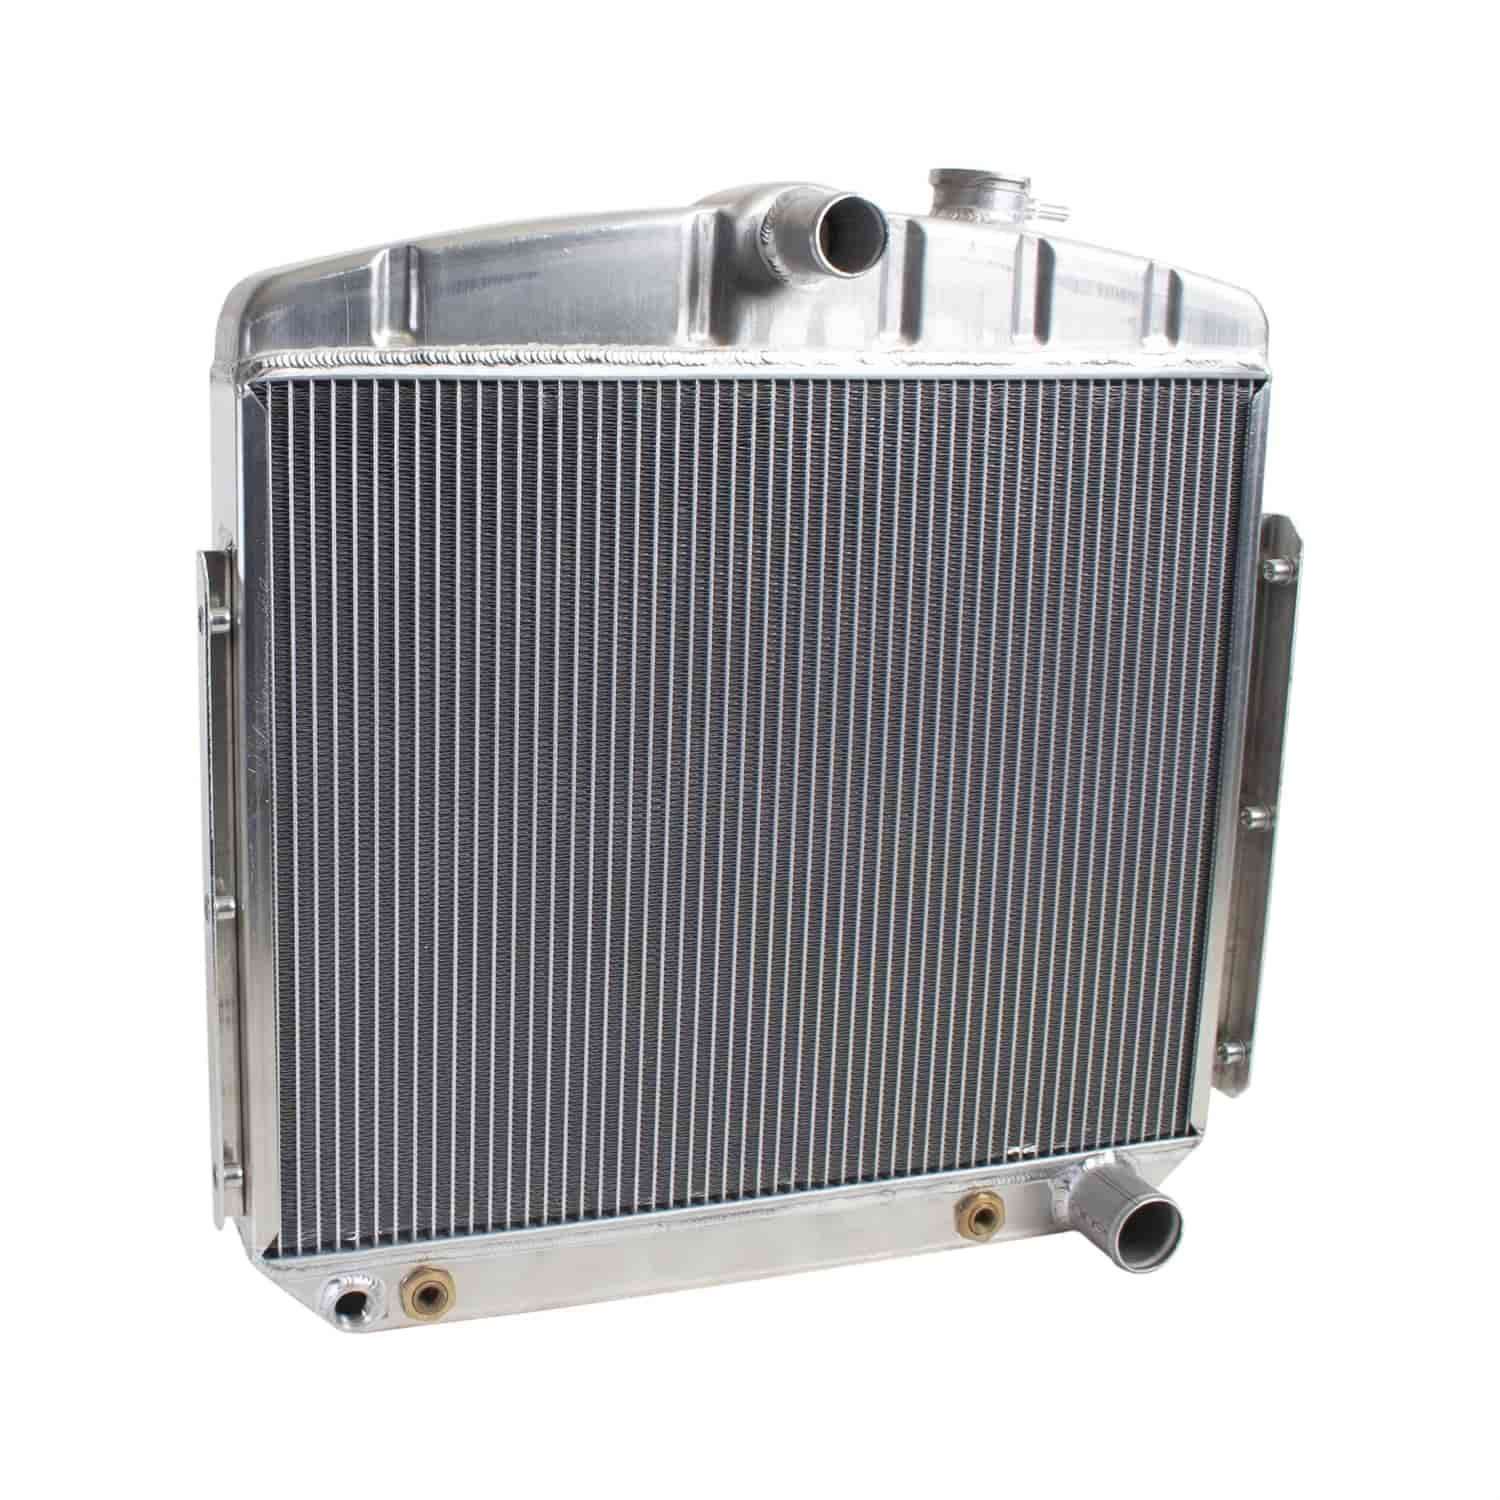 ExactFit Radiator for 1955-1956 Chevrolet Car for Chevy L6 Mount with Transmission Cooler